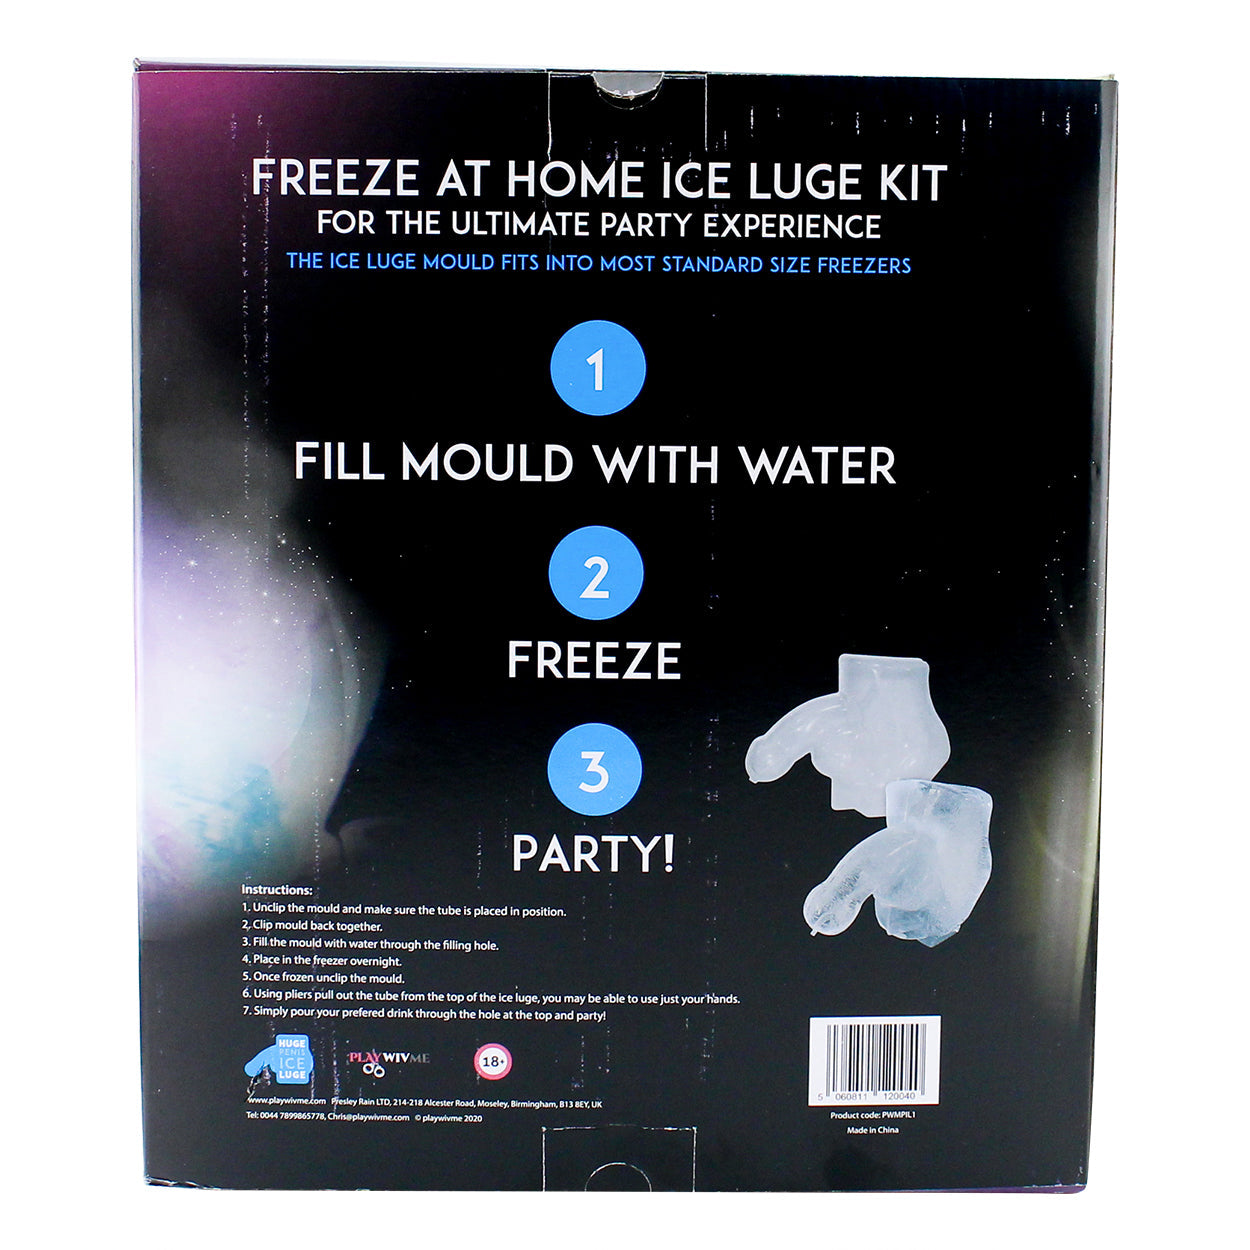 Party Ice Luge Reusable Mold Kit Review 